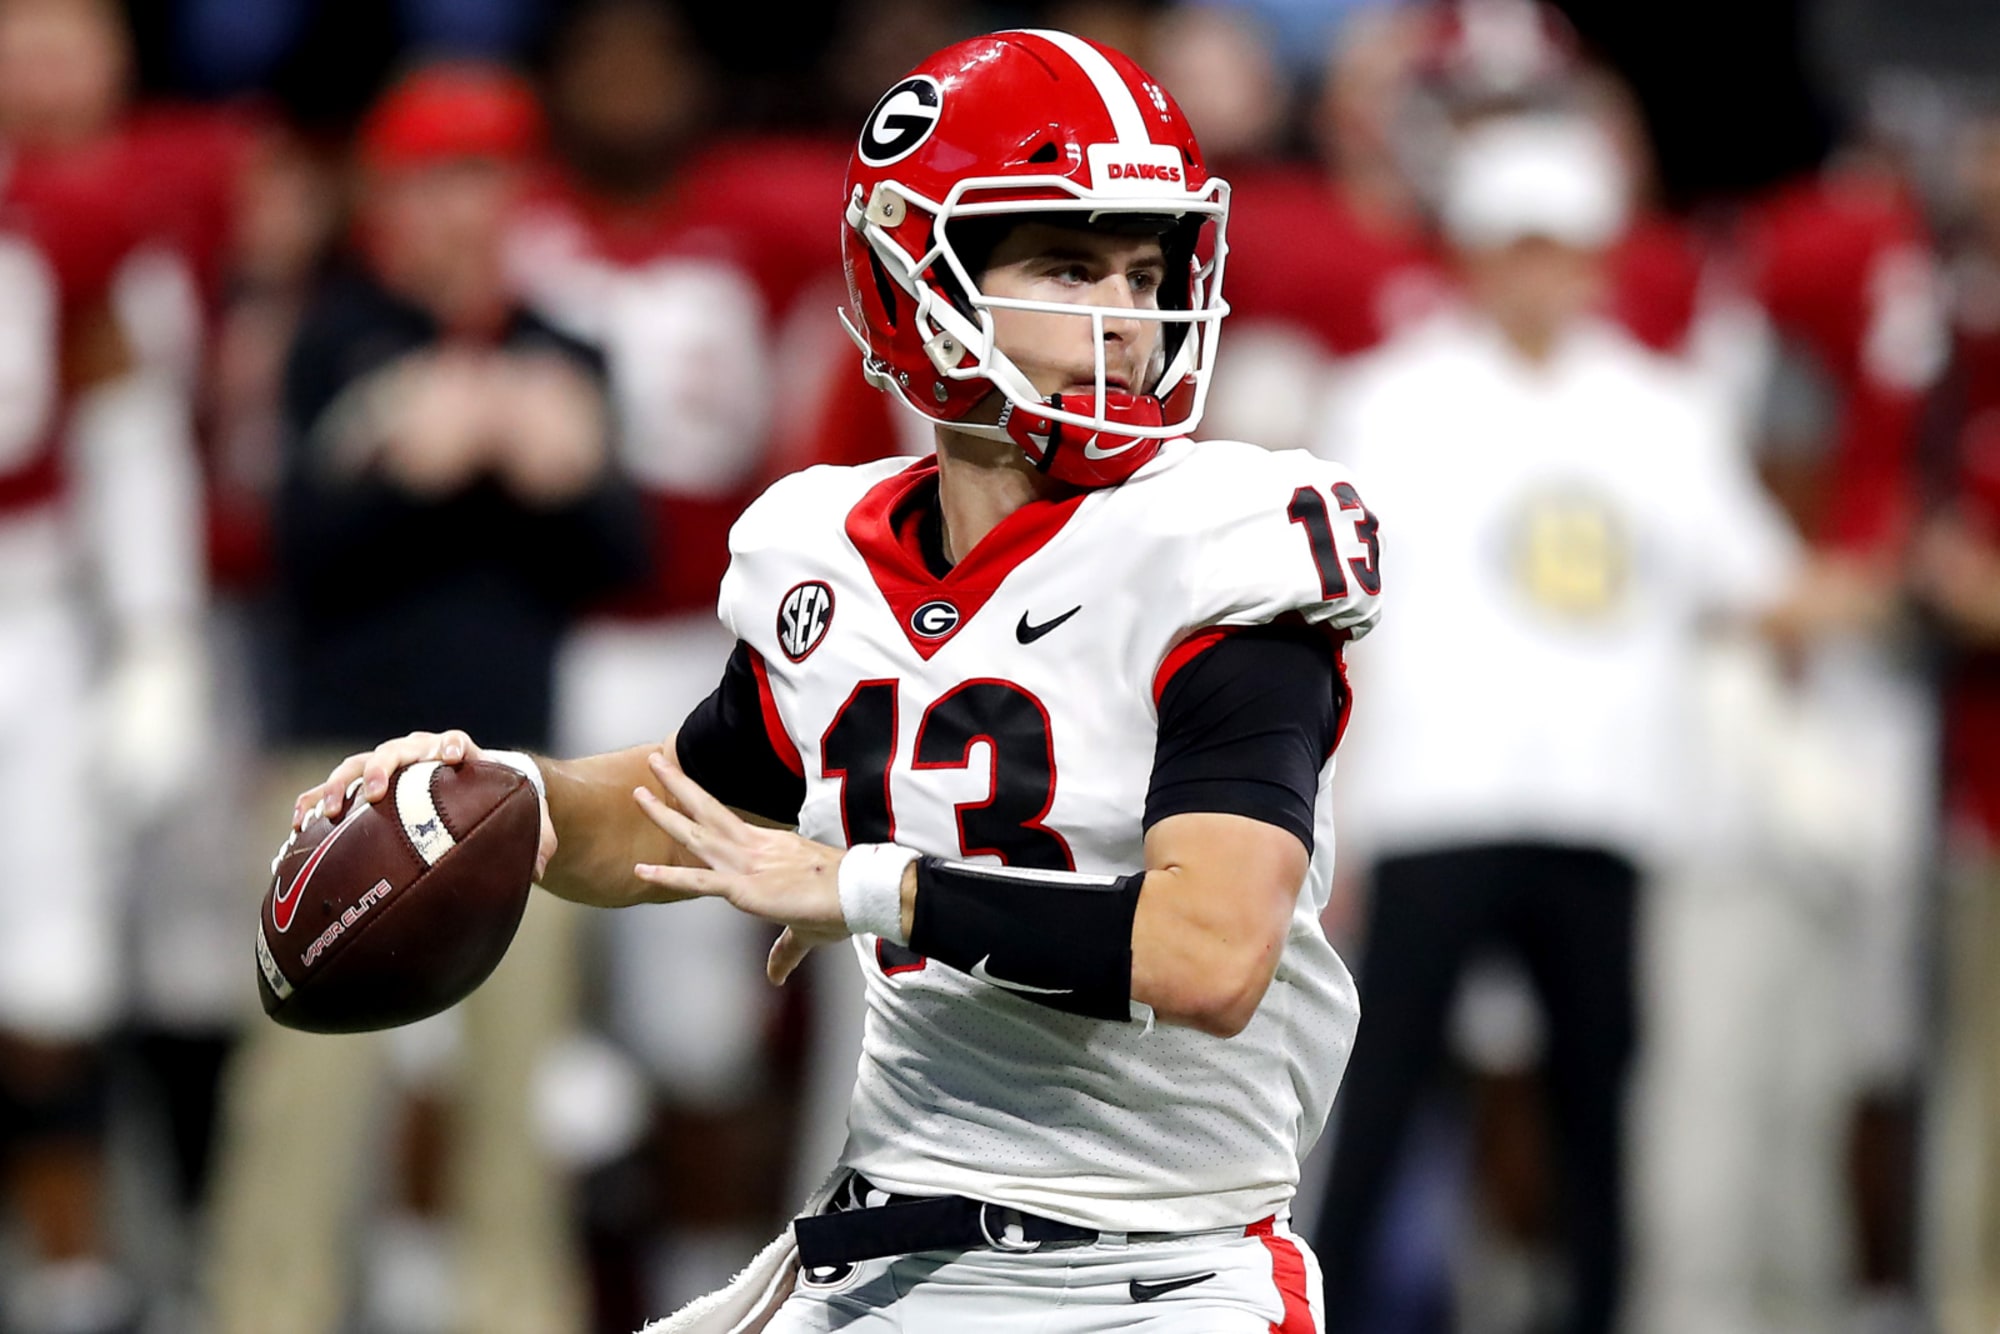 SEC Football Game Today Georgia vs Oregon Line, Predictions, Odds, TV Channel and Live Stream for SEC Football